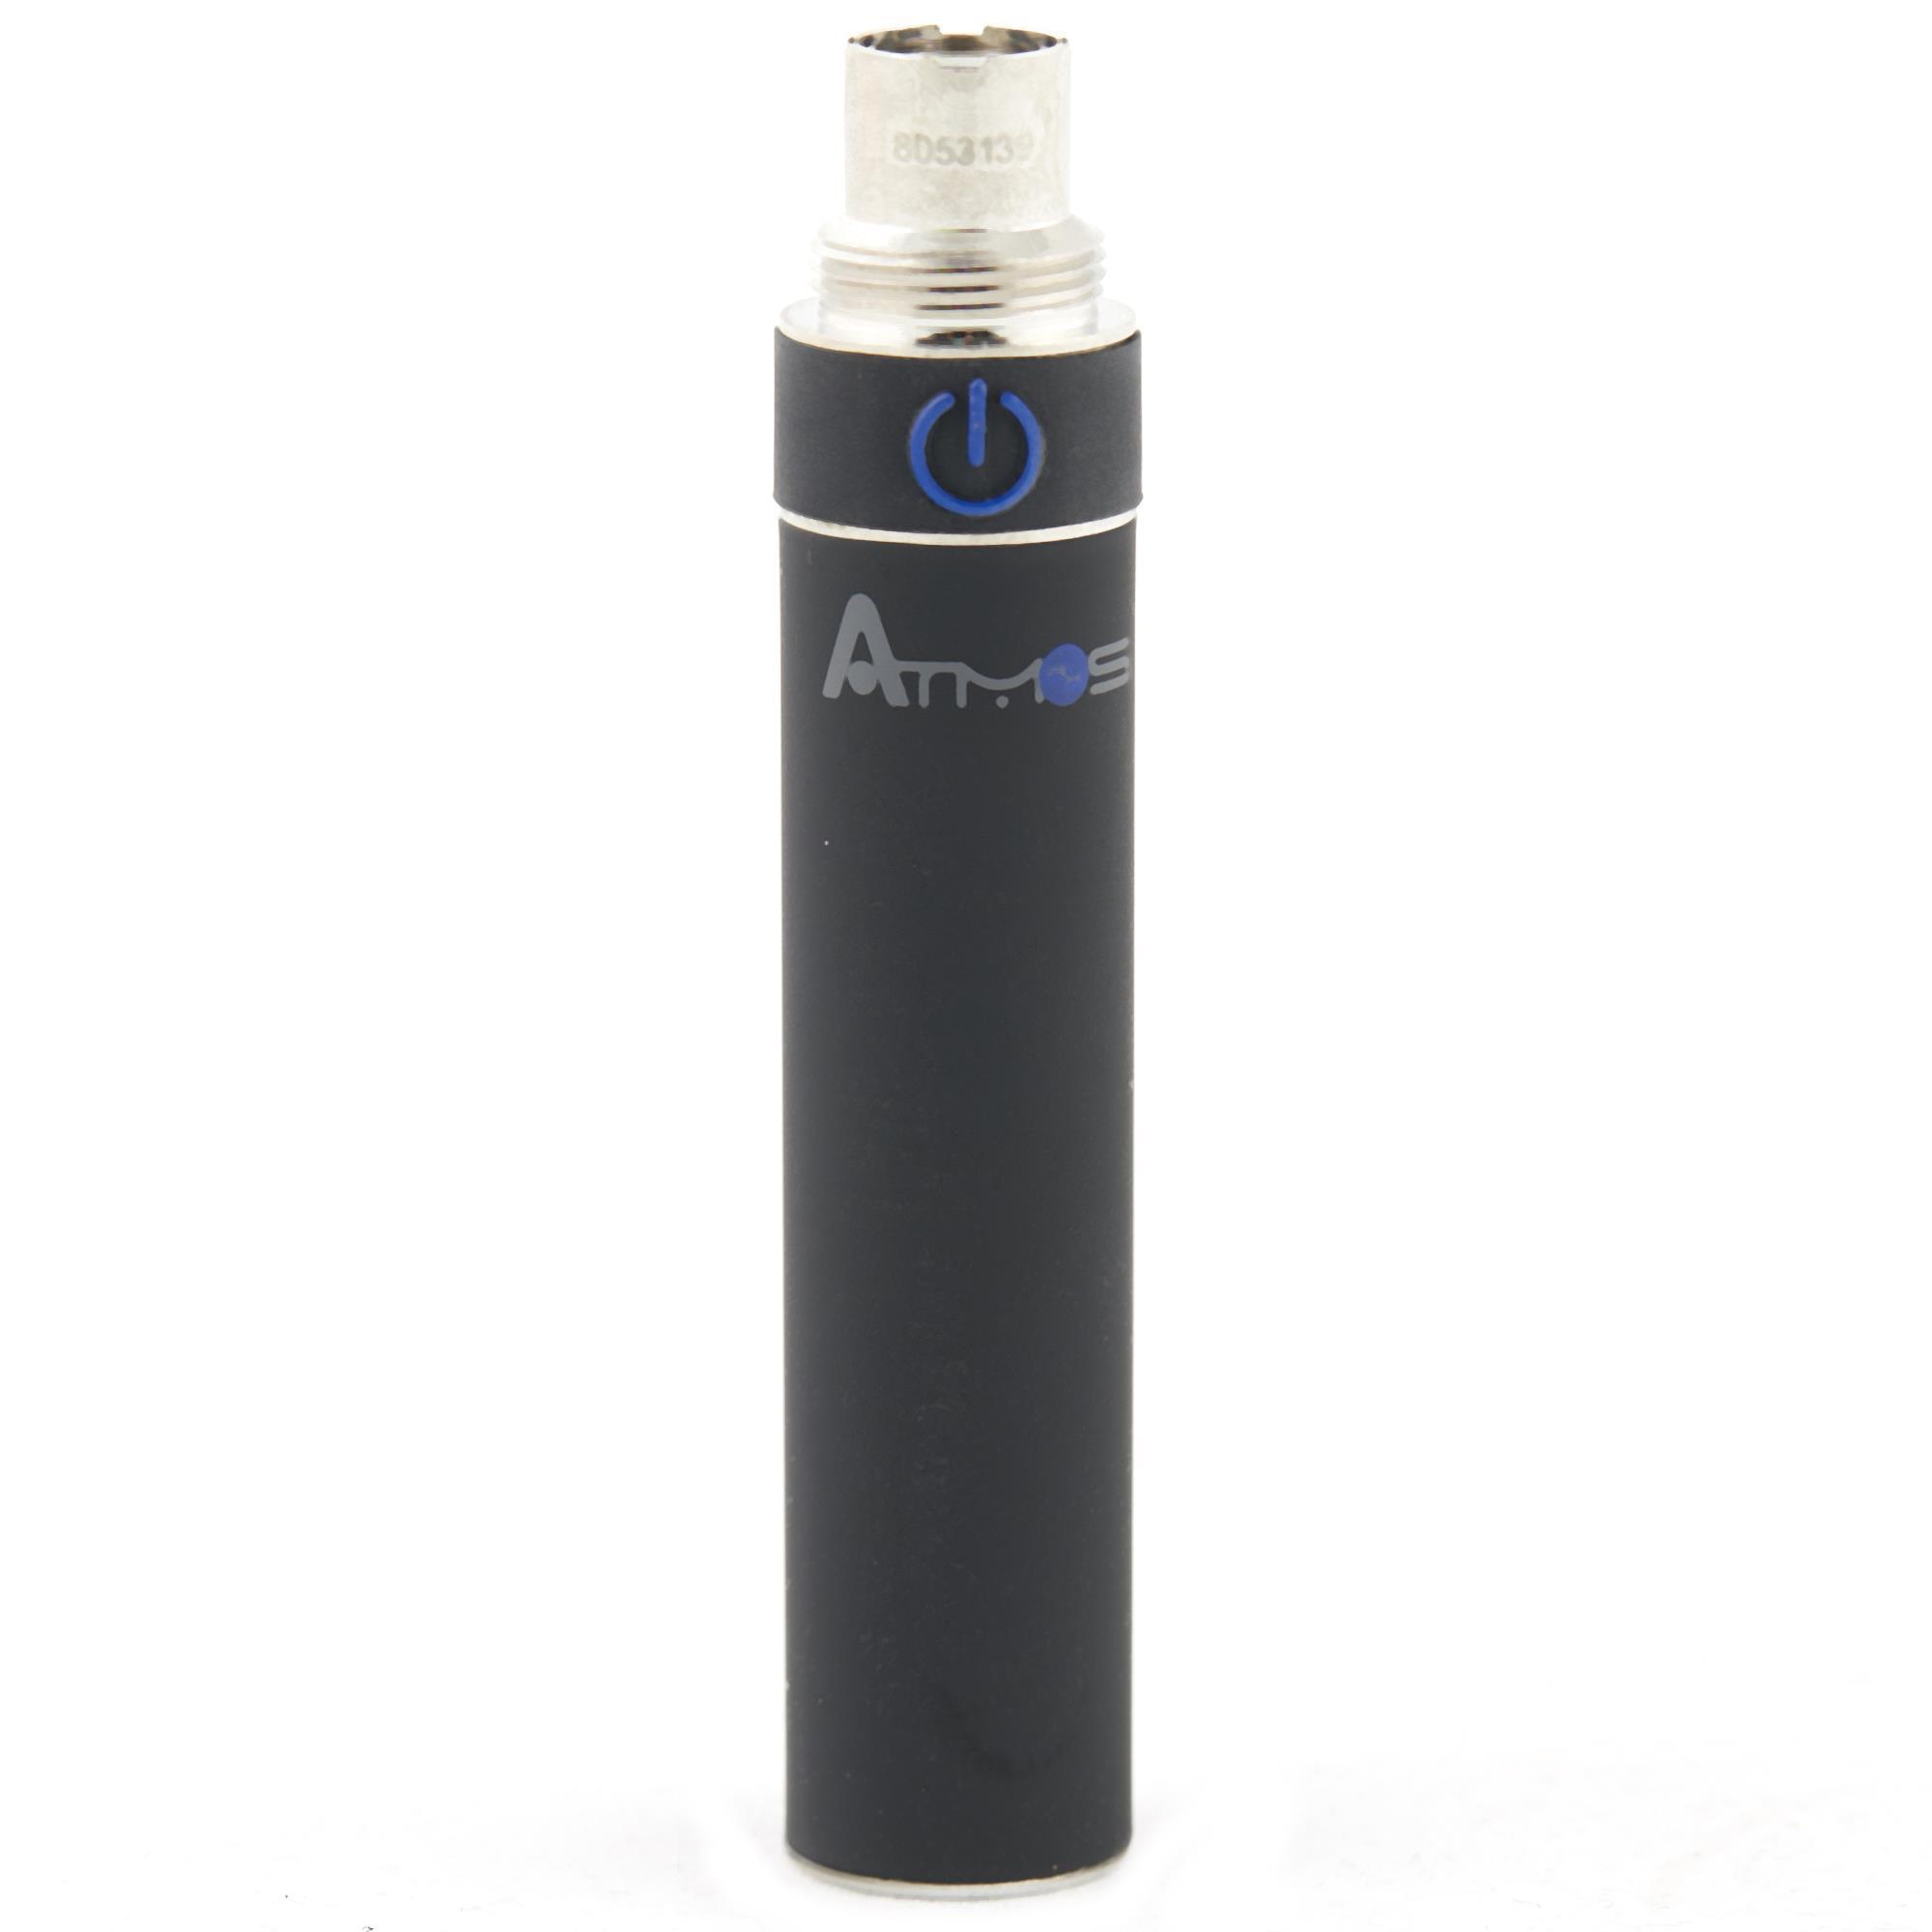 ATMOS RX DRY HERB BATTERY